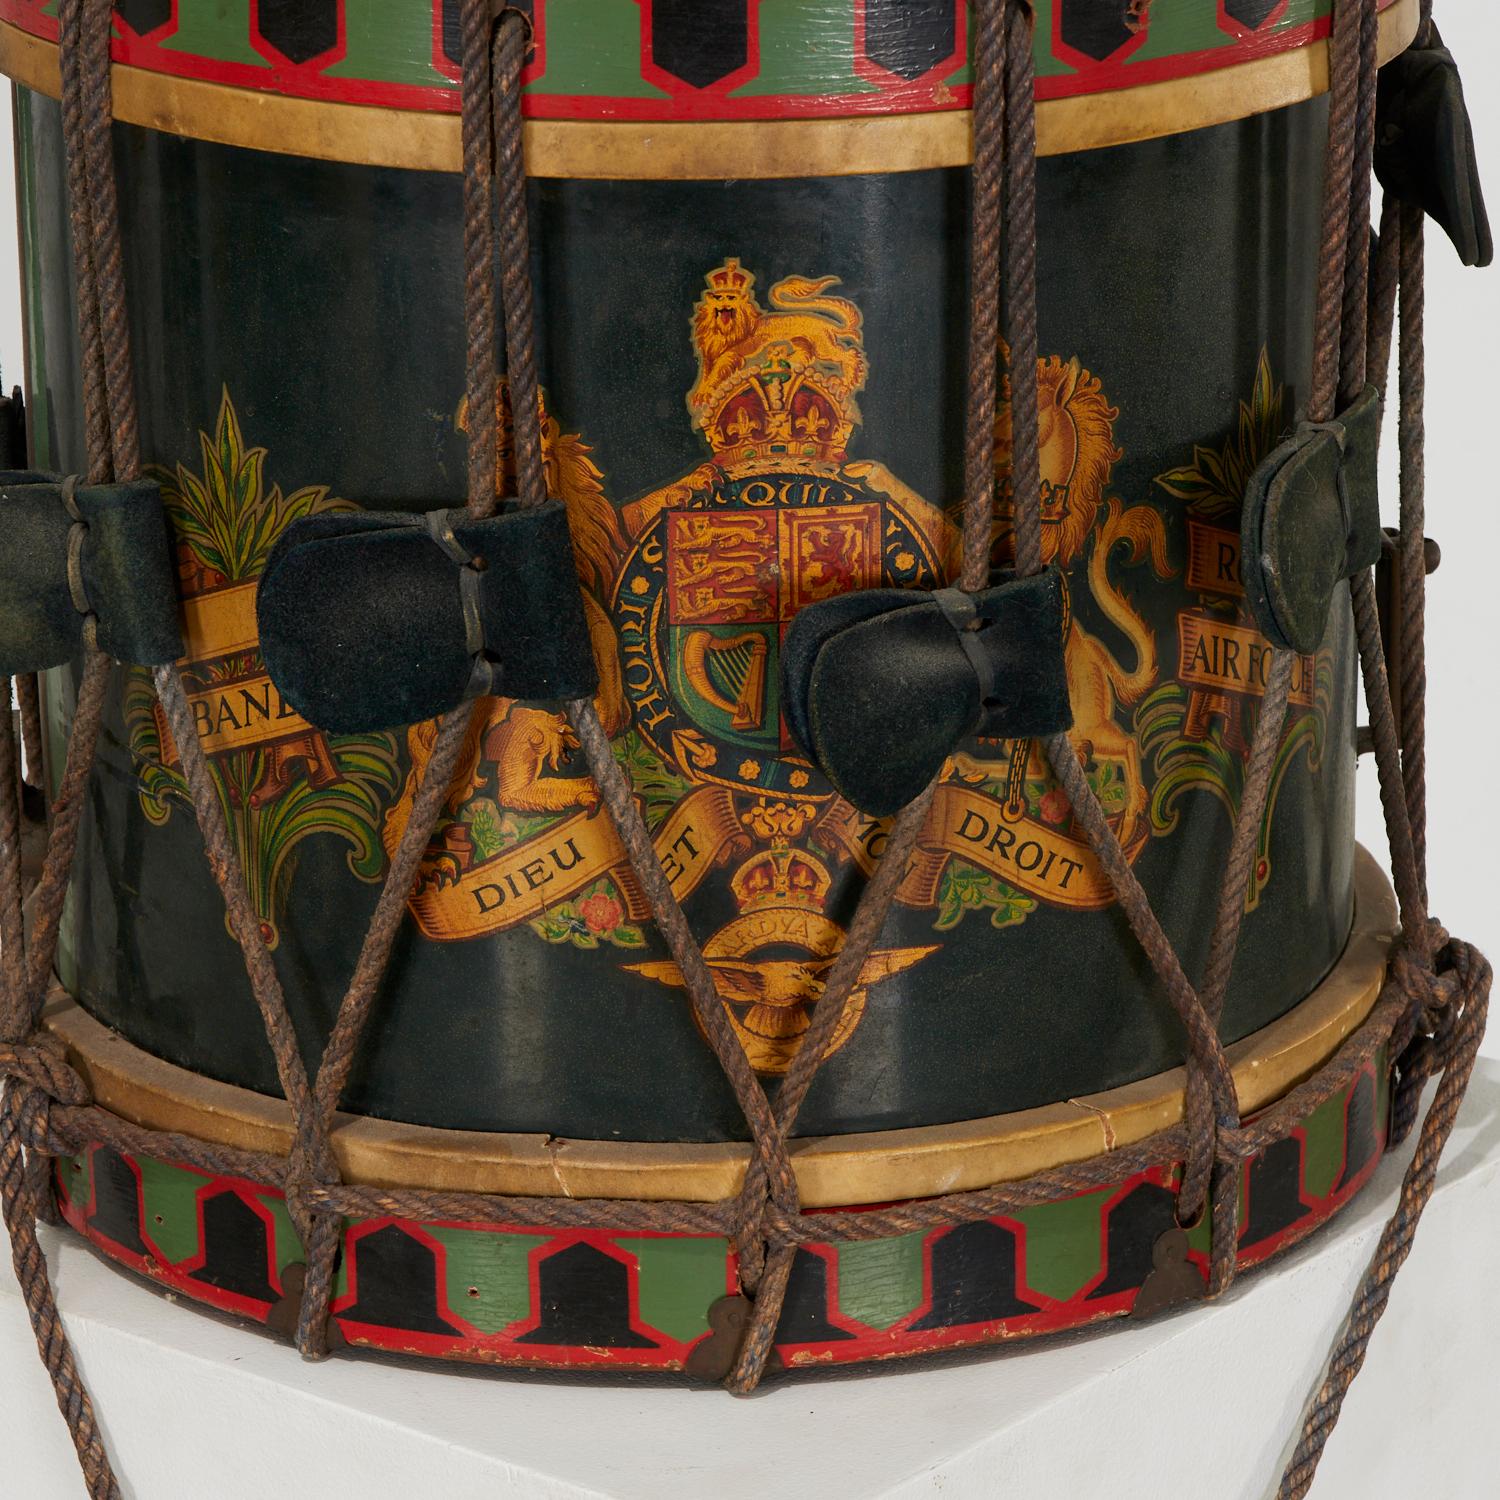 1947 England, a hand painted Premier Percussion British Royal Air Force drum. The drum has been painted with a black main body, a richly colored royal coat of arms and the motto of the British monarch 